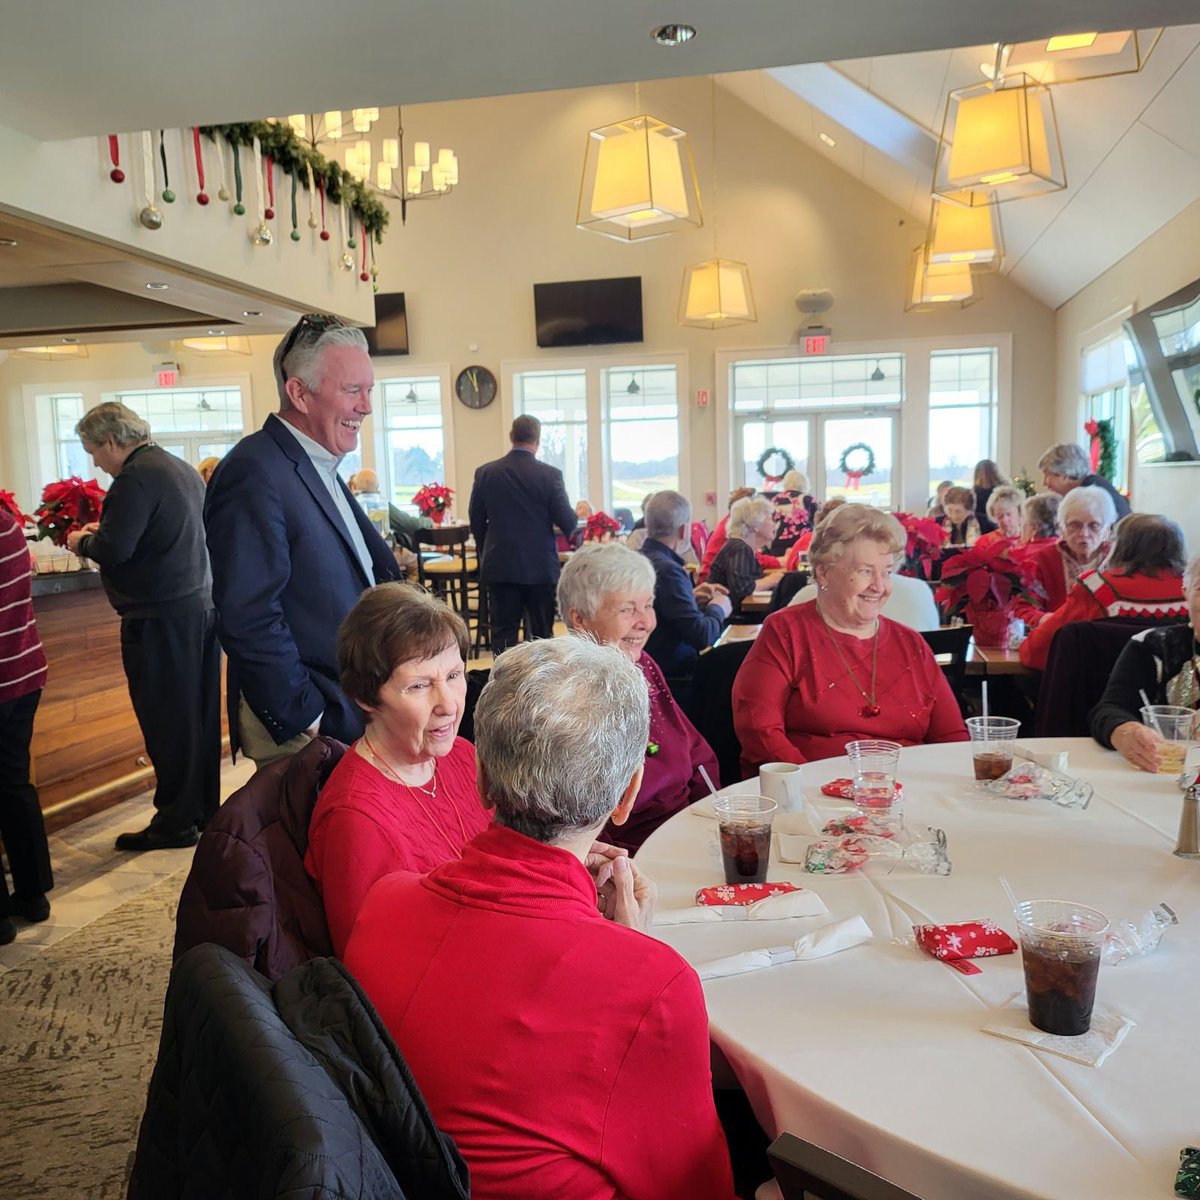 It was great to join Representative Paul McMurtry for Dedham Council on Aging and Westwood Council on Aging Holiday luncheons. Happy holidays and best wishes to all!